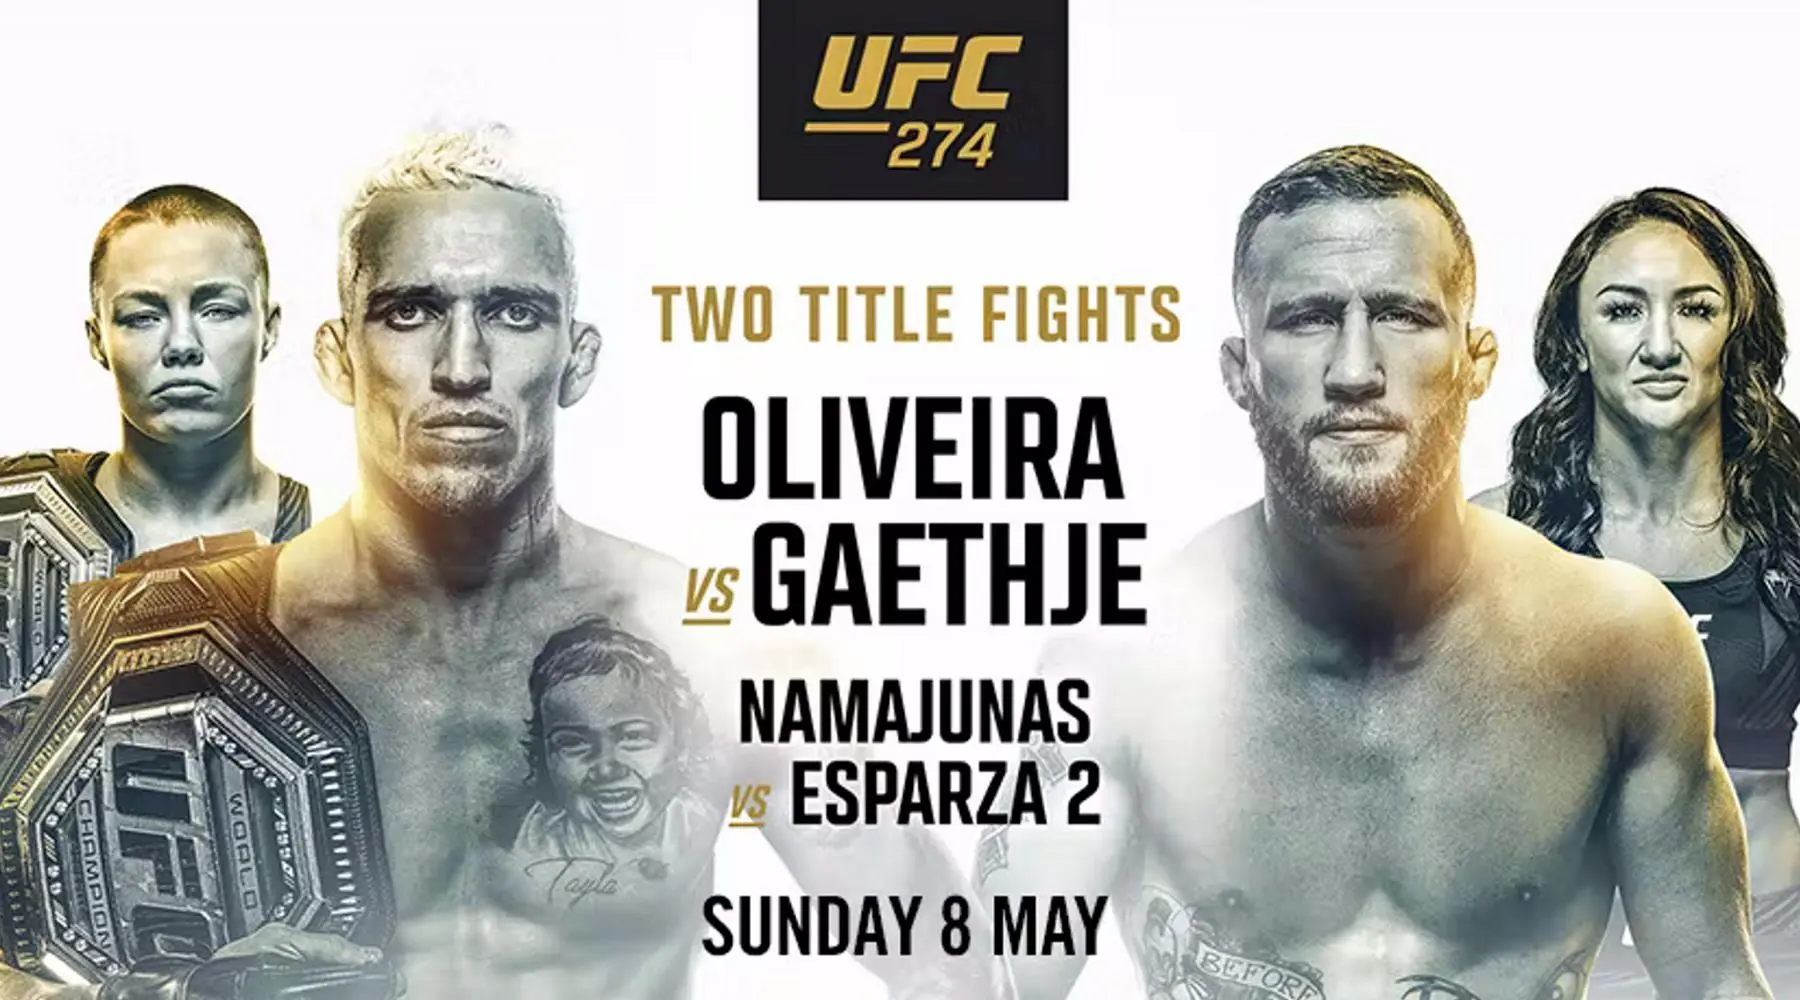 How to watch UFC 274 Oliveira vs Gaethje live in Australia